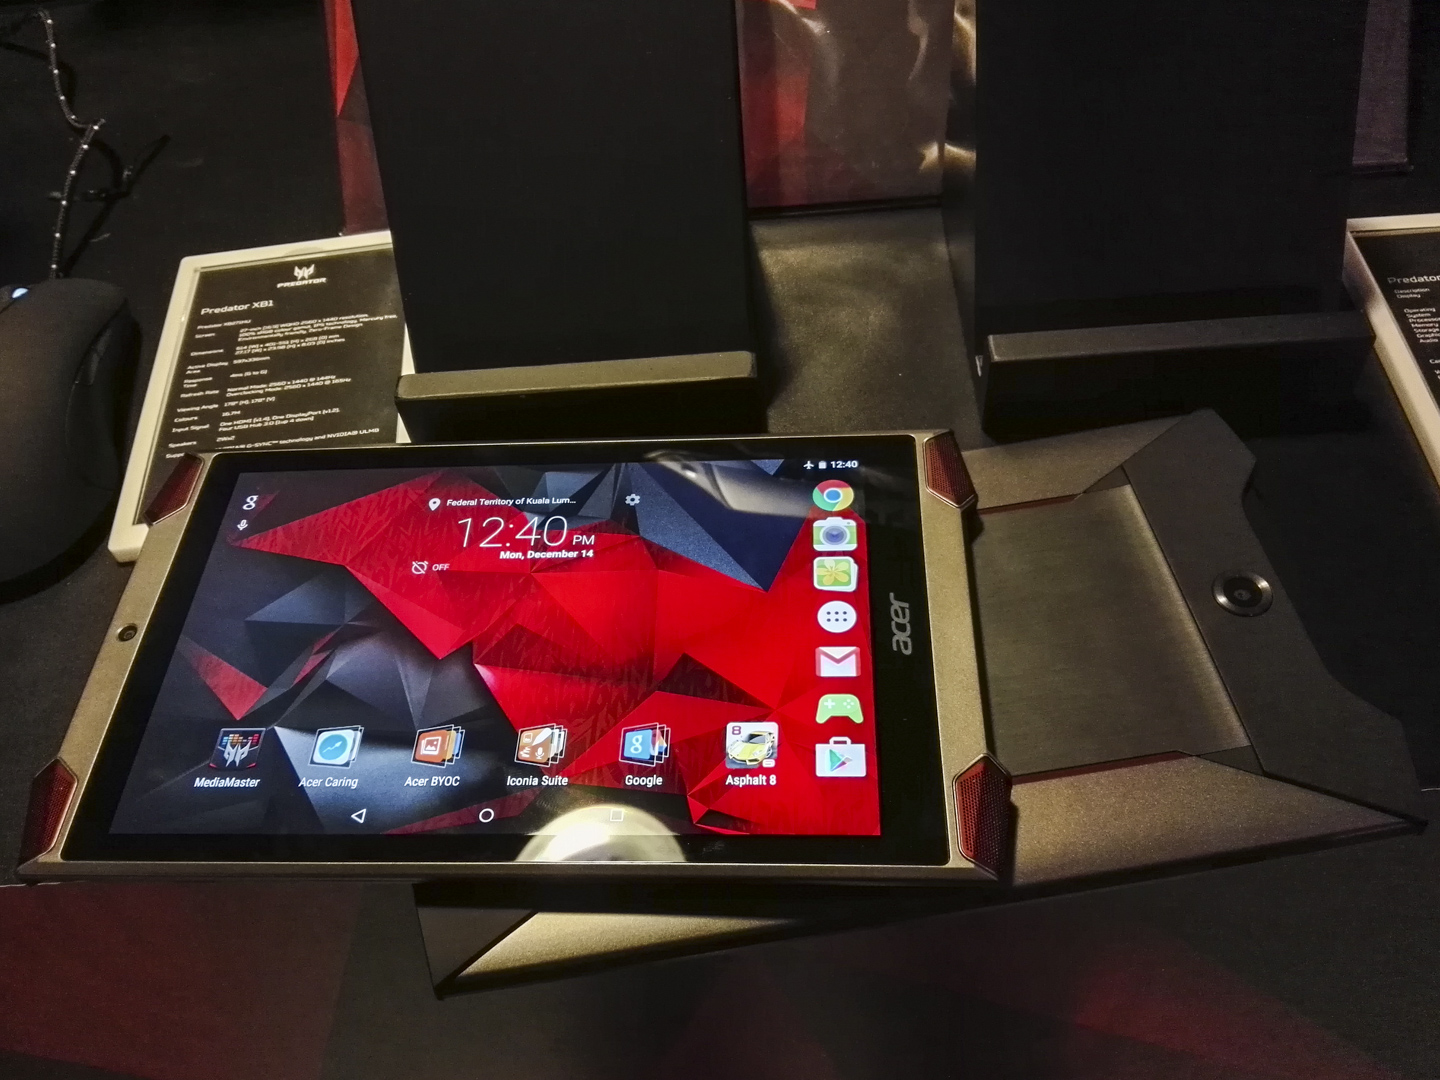 Acer Announces Predator 8 Gaming Tablet With Intel Atom x7 And Android 5.1